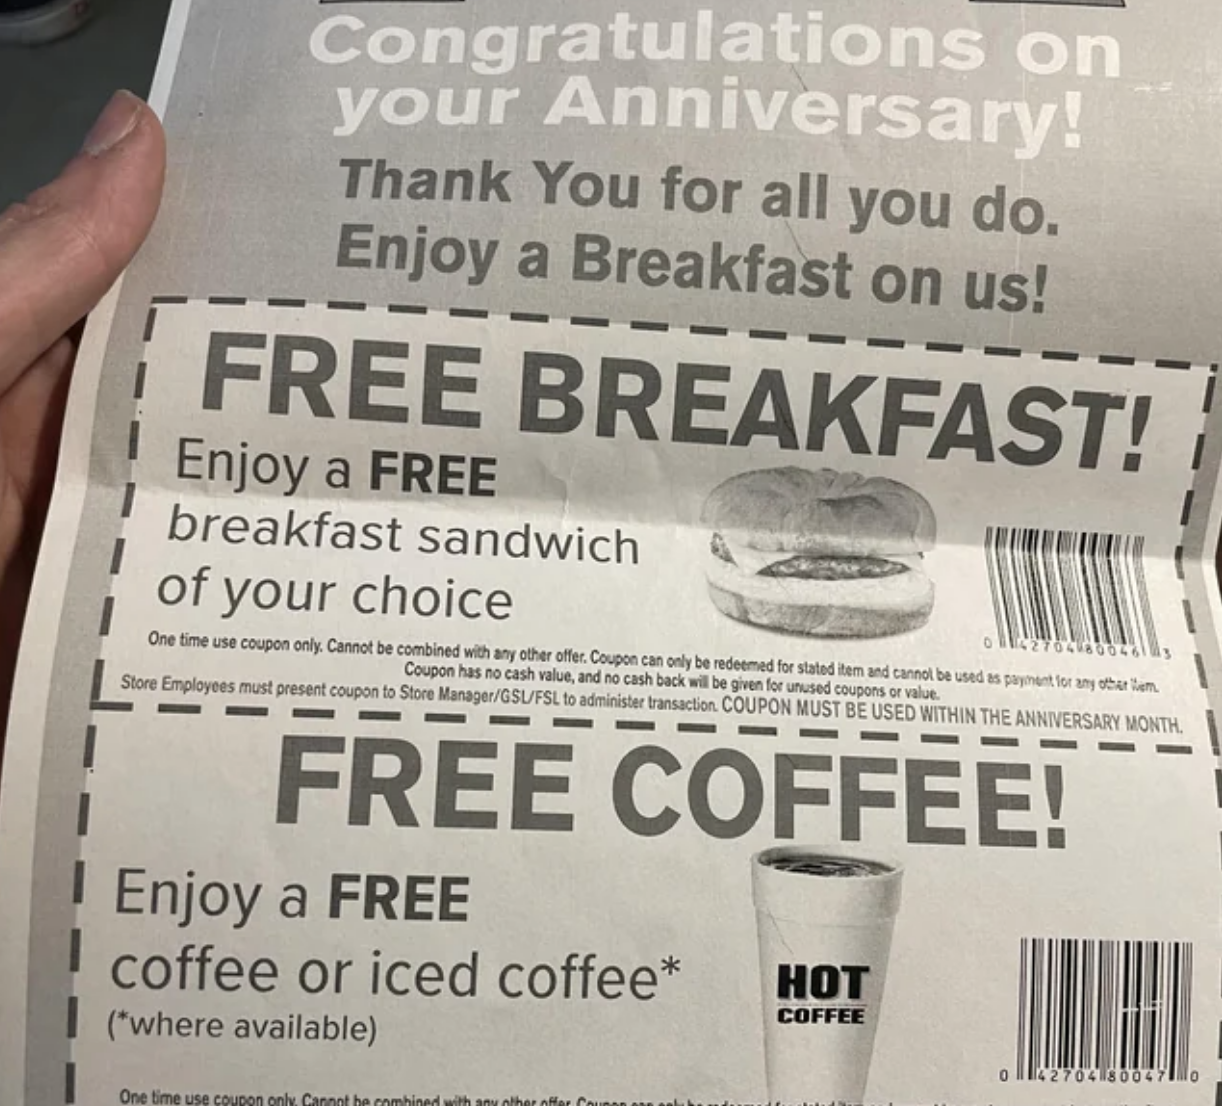 Coupons for free breakfast or coffee